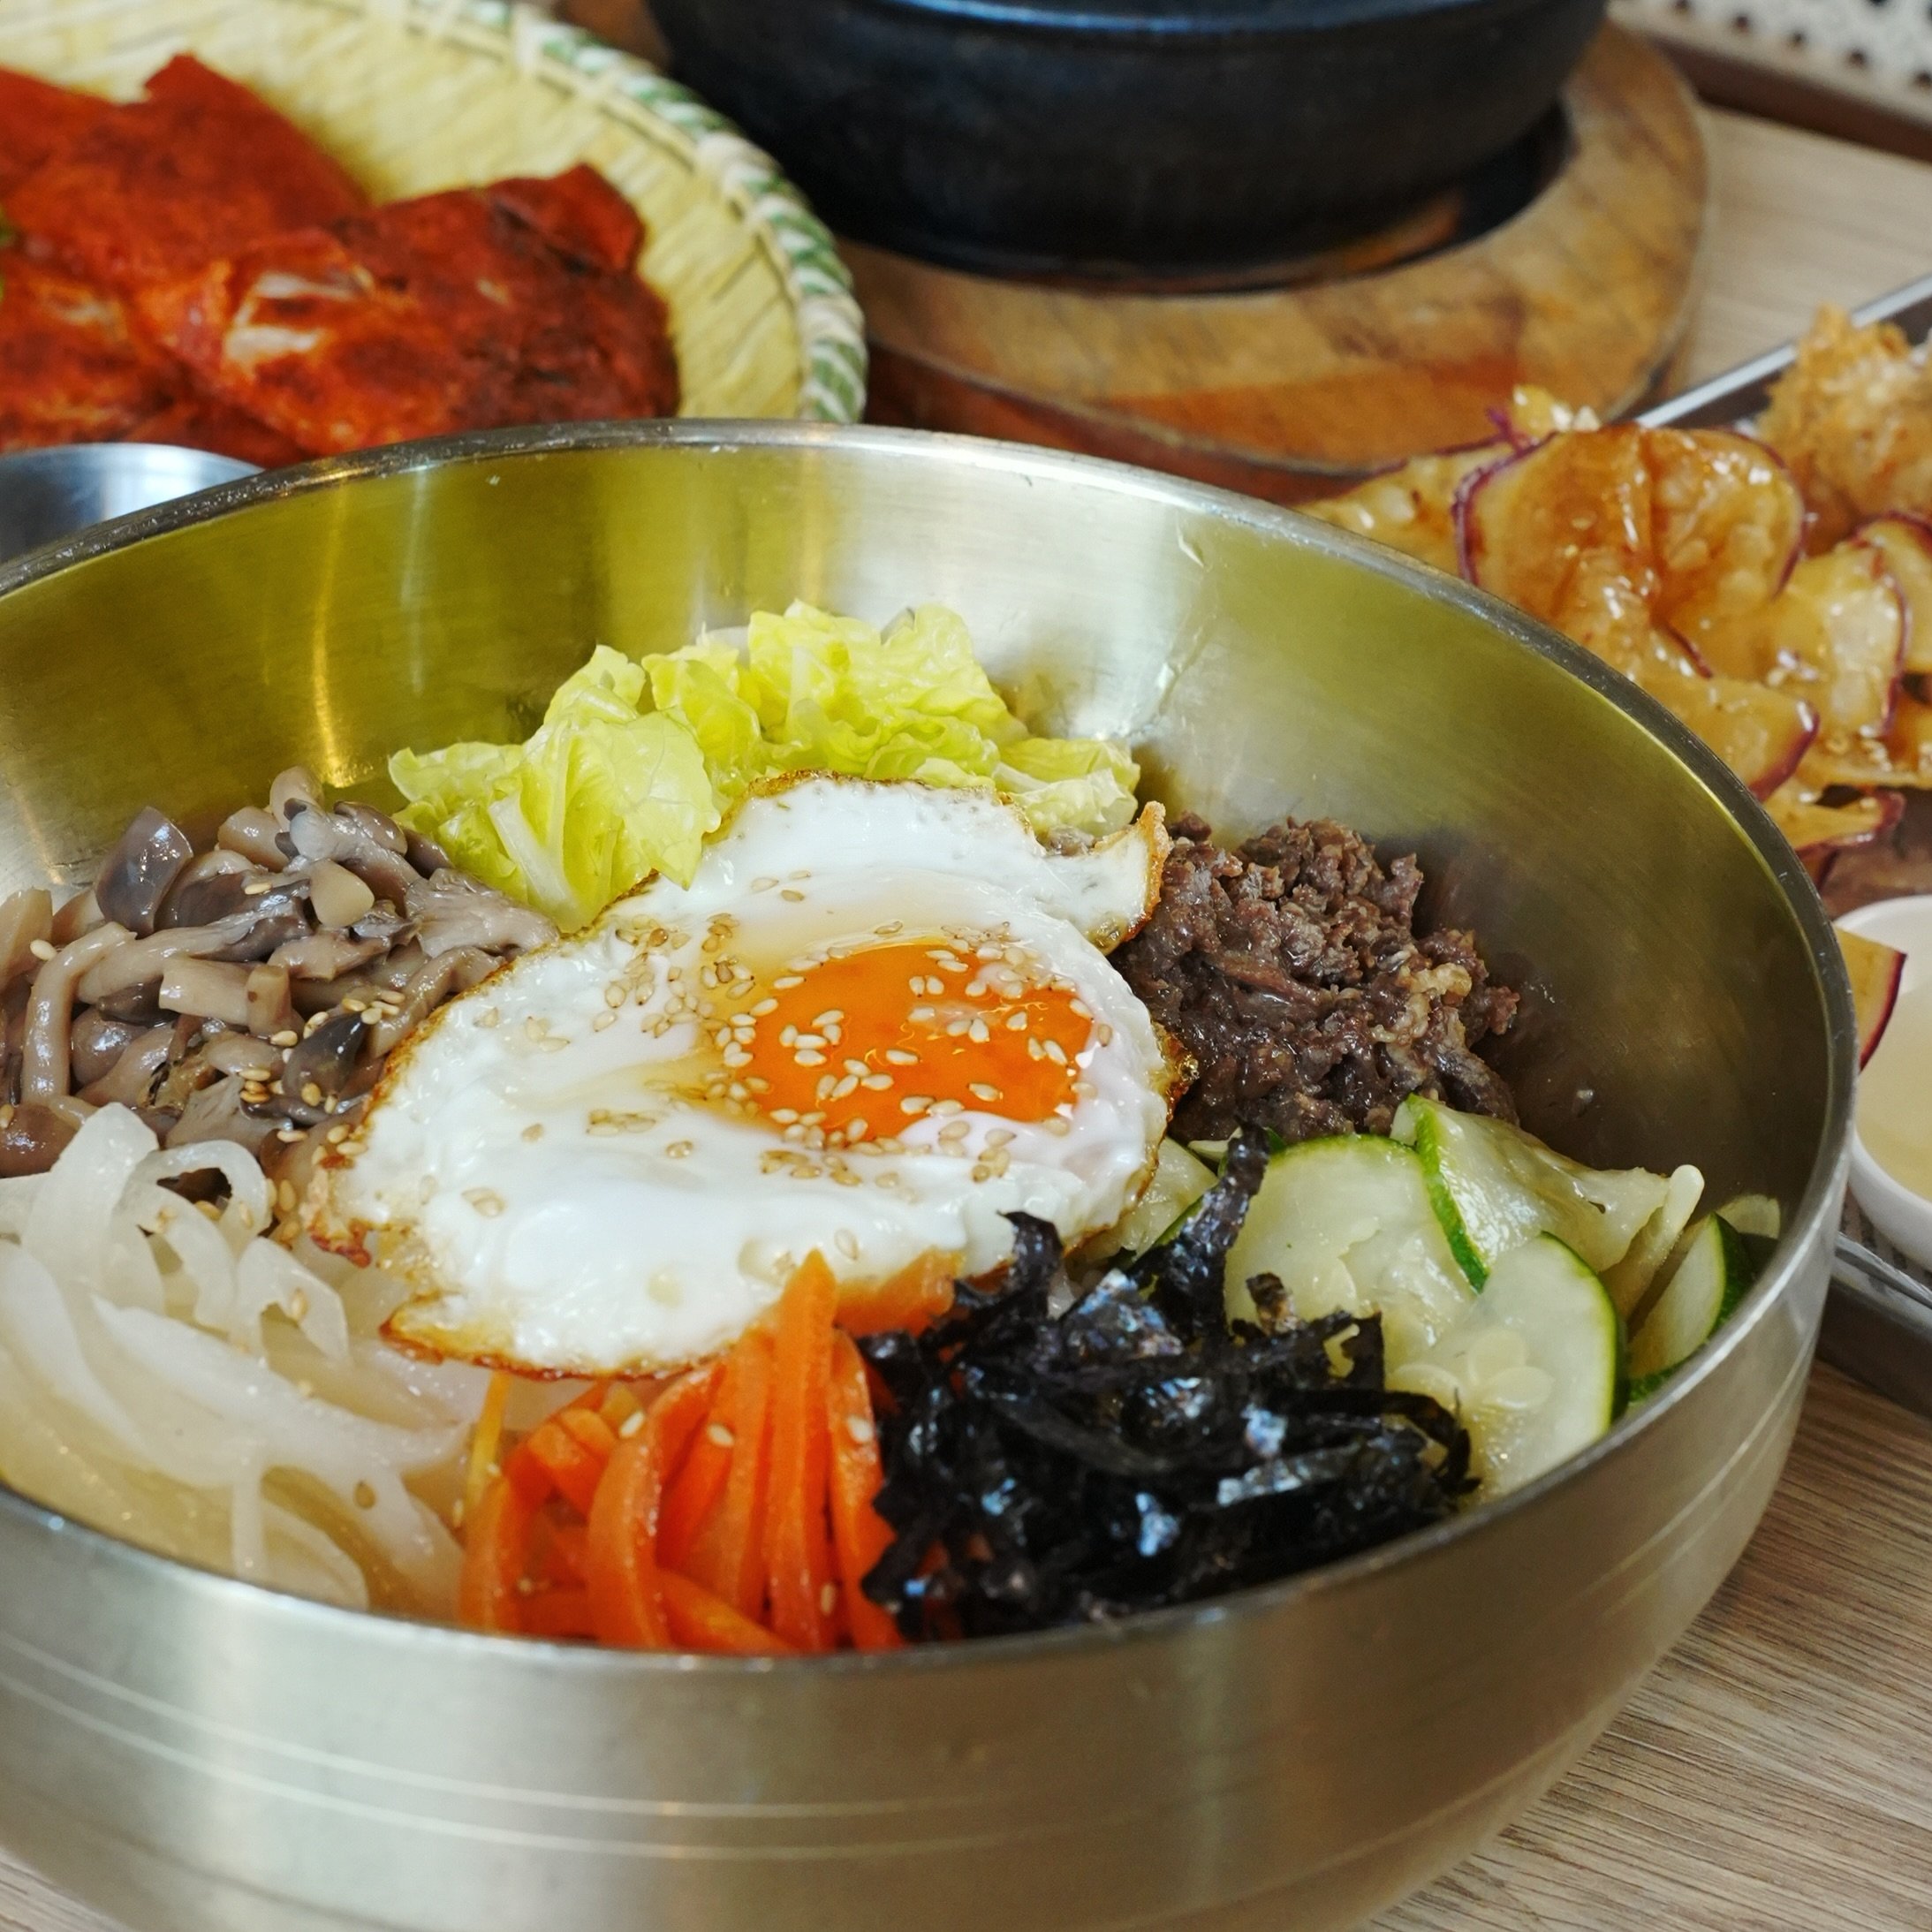 Check out ur delicious traditional Korean BIBIMBAP! It&rsquo;s a must-try dish that&rsquo;s packed with flavor and it&rsquo;s also super healthy. We top it off with our BBQ-grilled meat for an extra burst of flavor. ❣️💪😋

🛣️ 1898 Logan Road, Upper